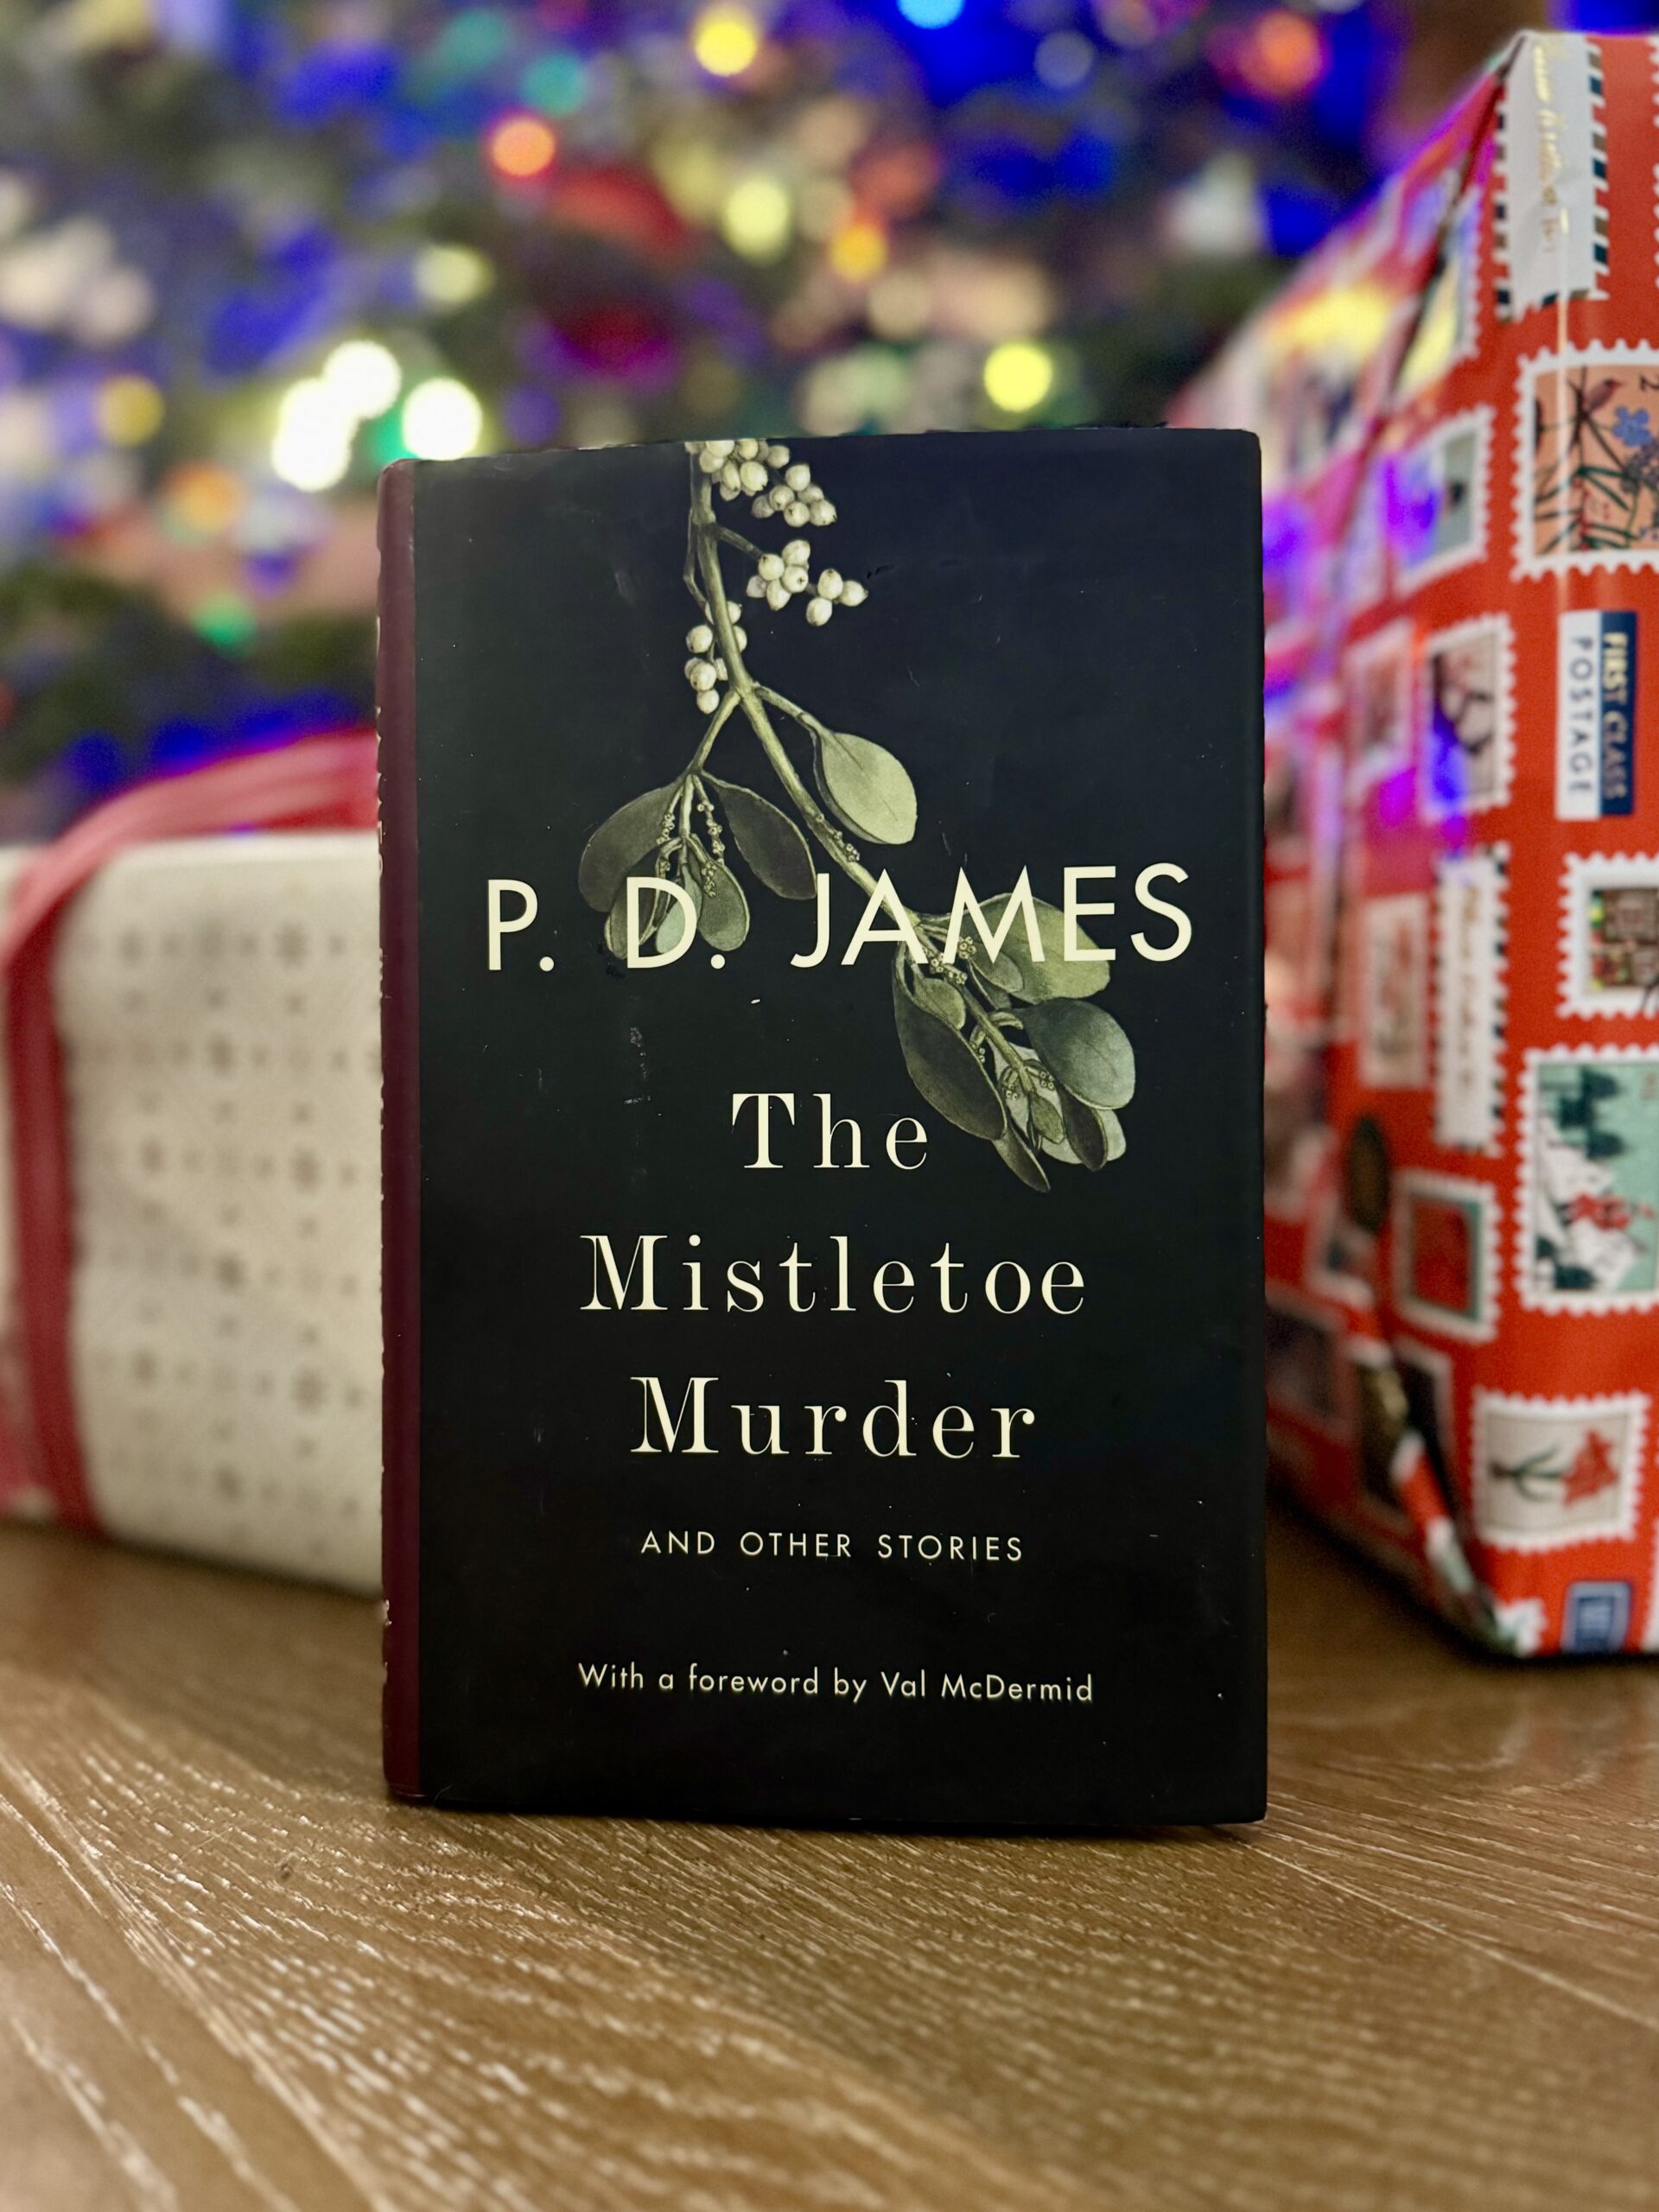 Advent of Mystery, Day 1: The Mistletoe Murders by P.D. James